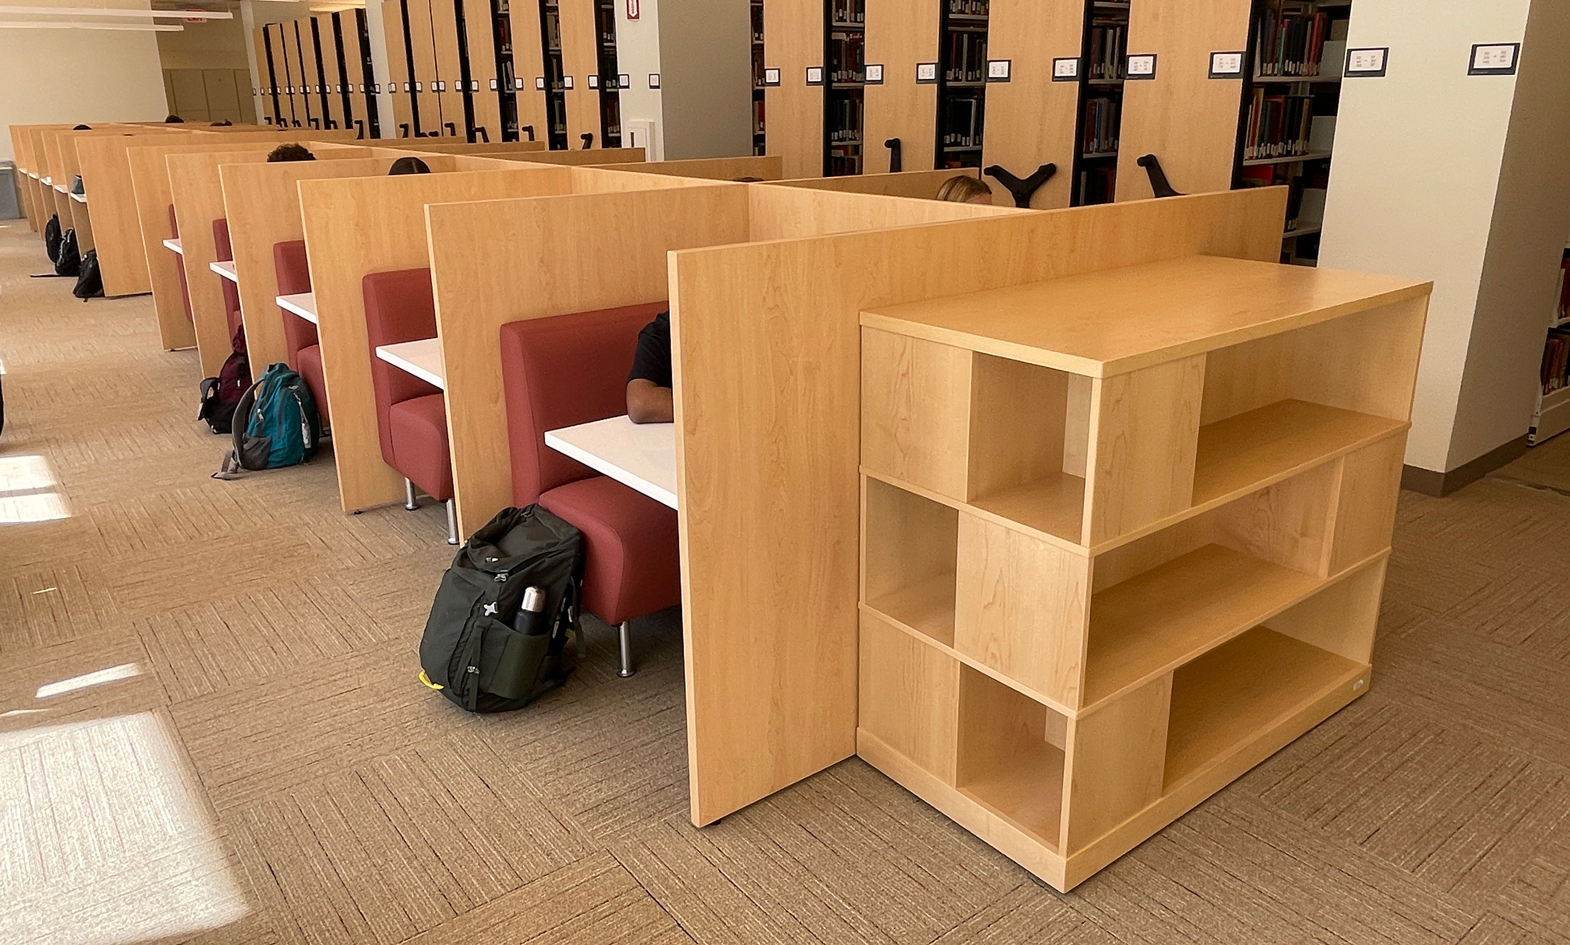 modern study carrels, with storage for backpacks and custom display shelving